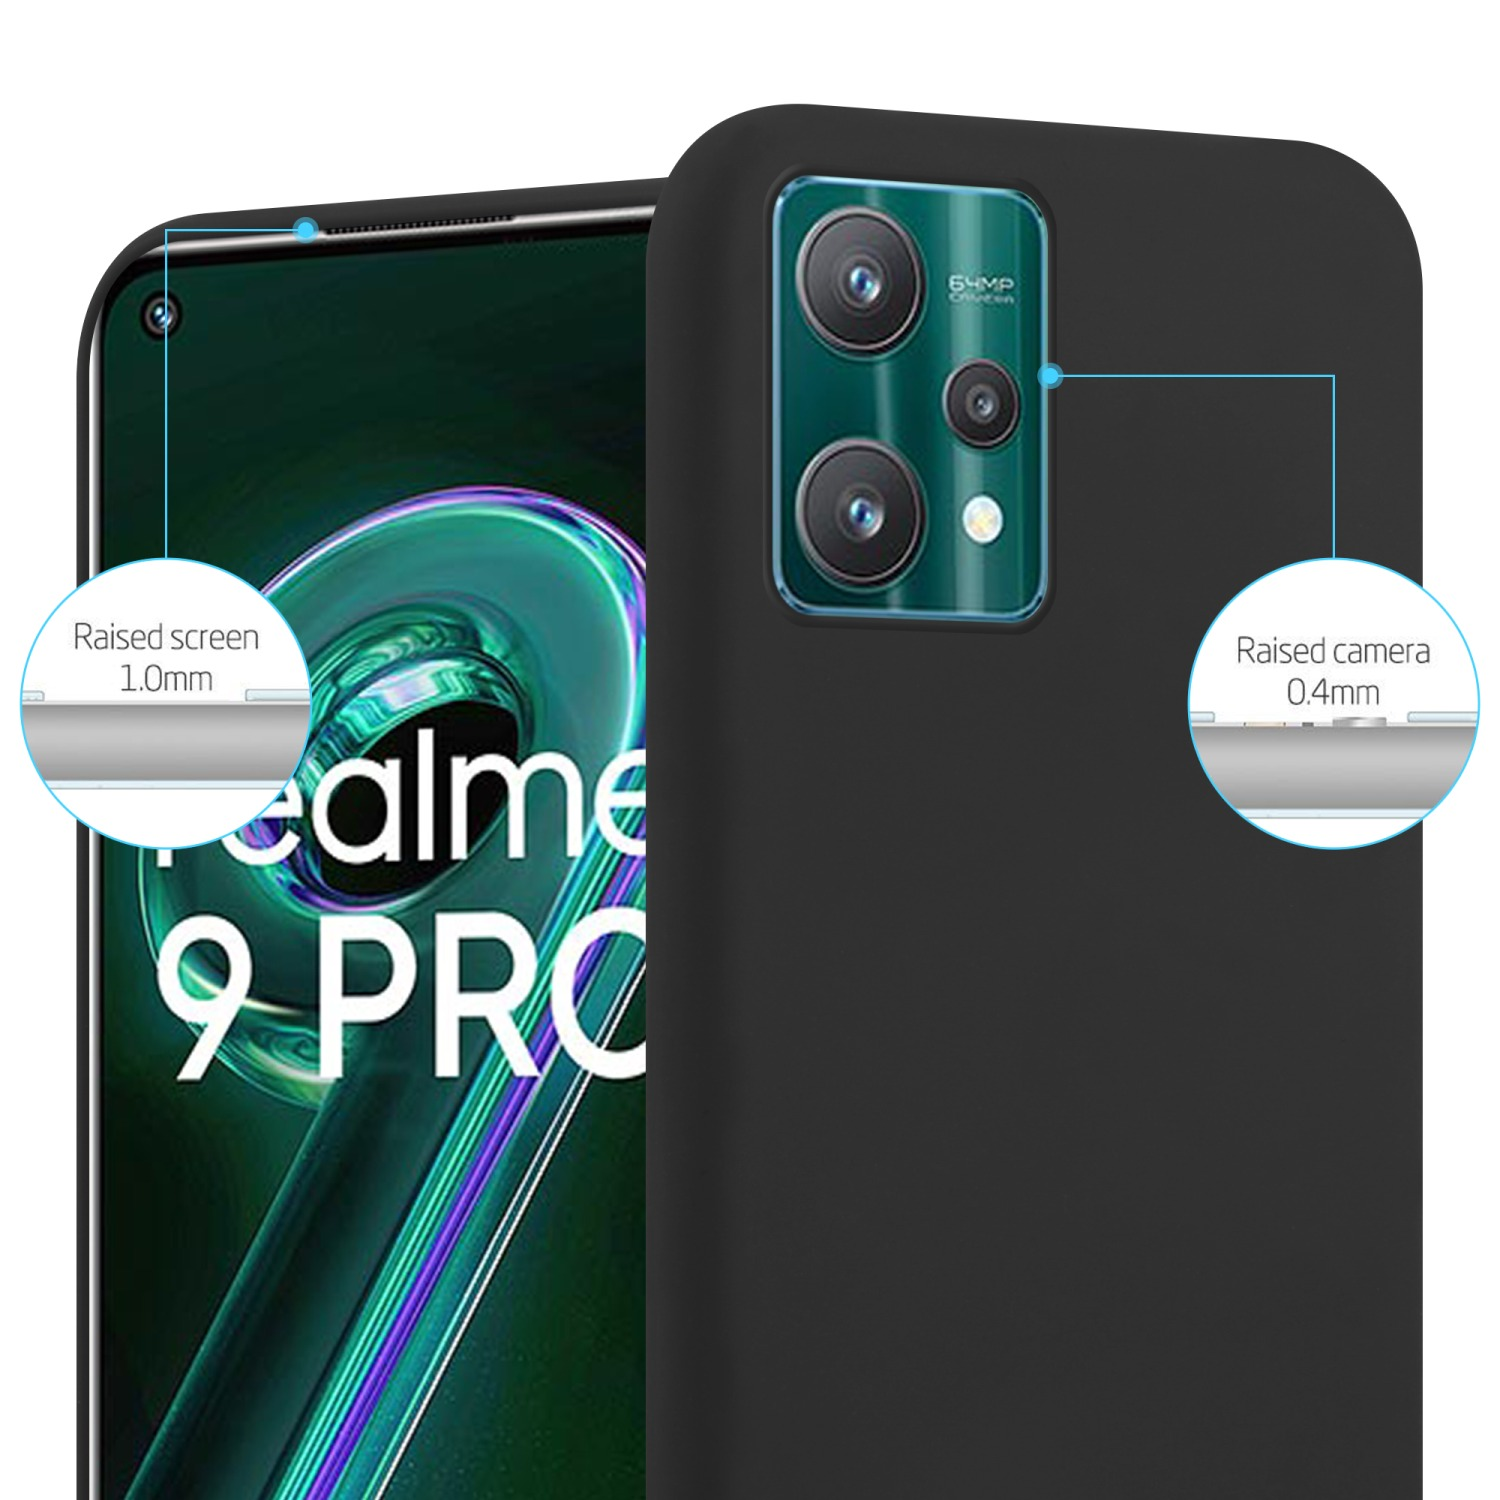 CADORABO Hülle im TPU Candy 5G, / 9 / CE PRO V25 Style, LITE / Nord Backcover, CANDY SCHWARZ 9 Realme, Q5 2 / OnePlus 5G